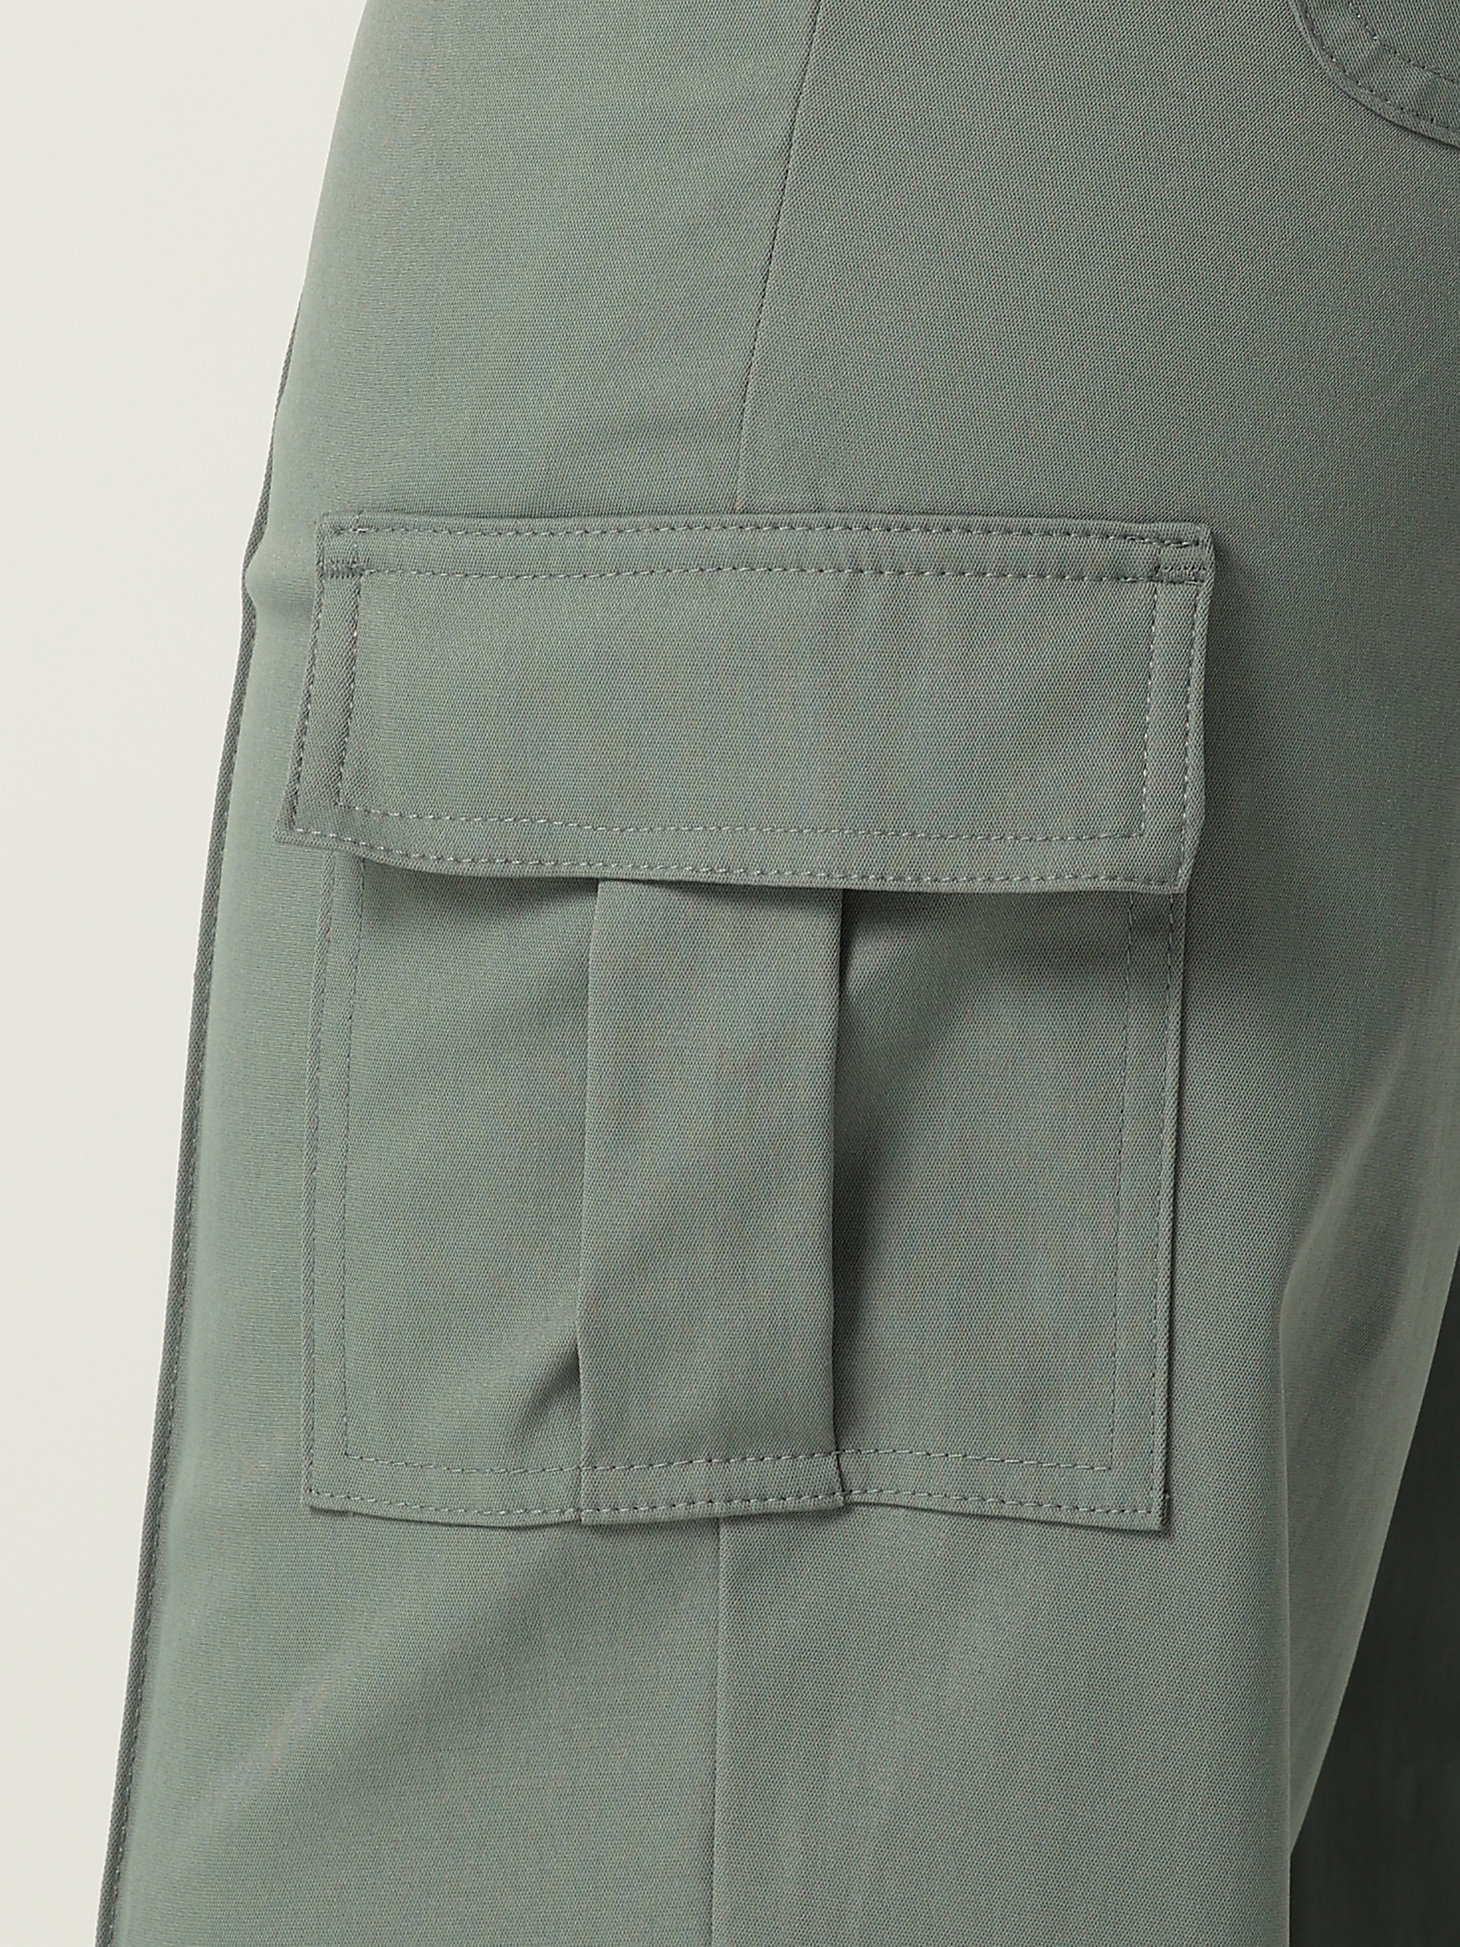 Women's Flex-to-Go Seamed Cargo Straight Leg Pant in Fort Green alternative view 3